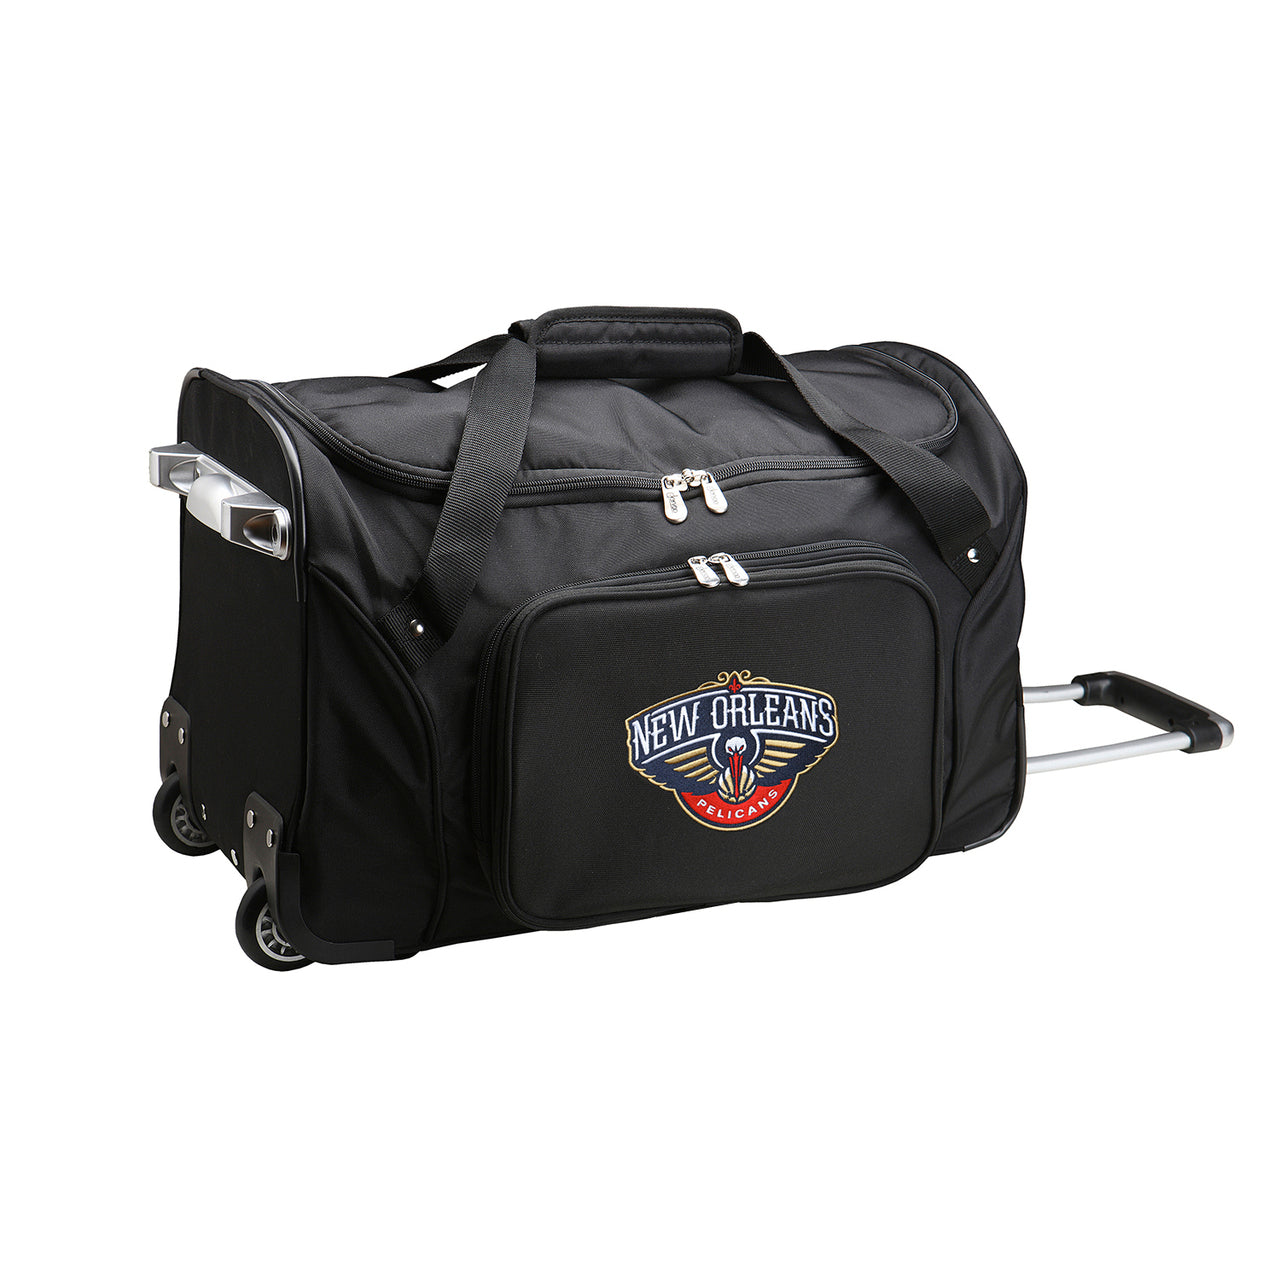 NBA New Orleans Pelicans Luggage | NBA New Orleans Pelicans Wheeled Carry On Luggage